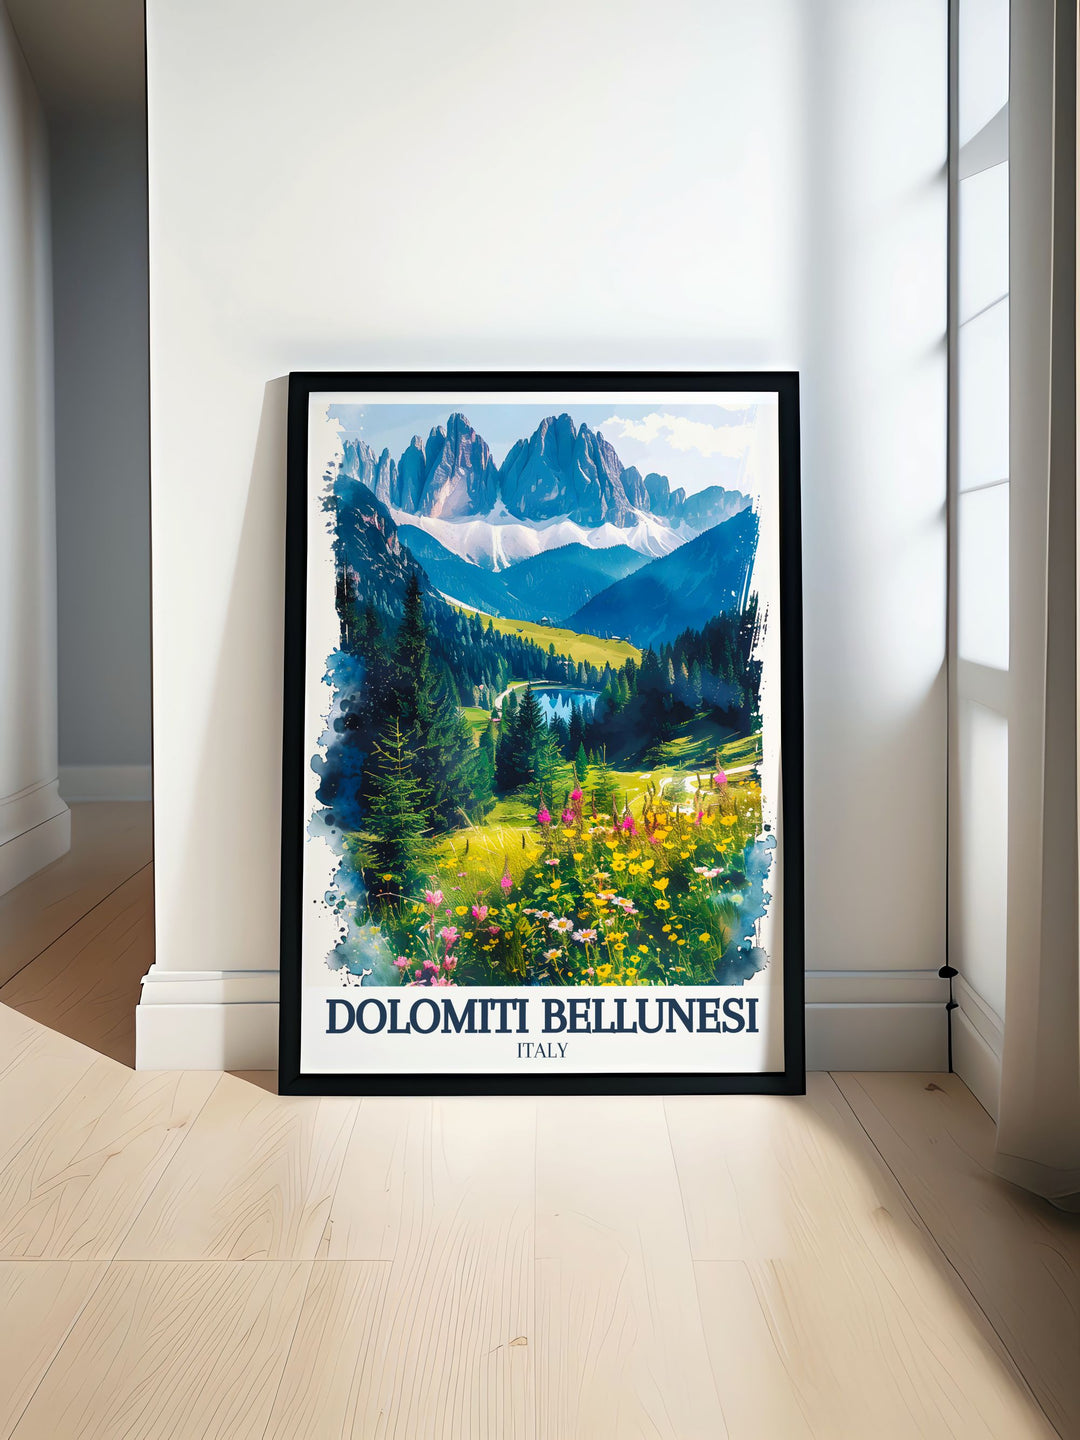 Dolomite range travel poster capturing the stunning beauty of the Dolomiti Bellunesi in Northern Italy perfect for enhancing your home decor with breathtaking views of the Italian mountains.